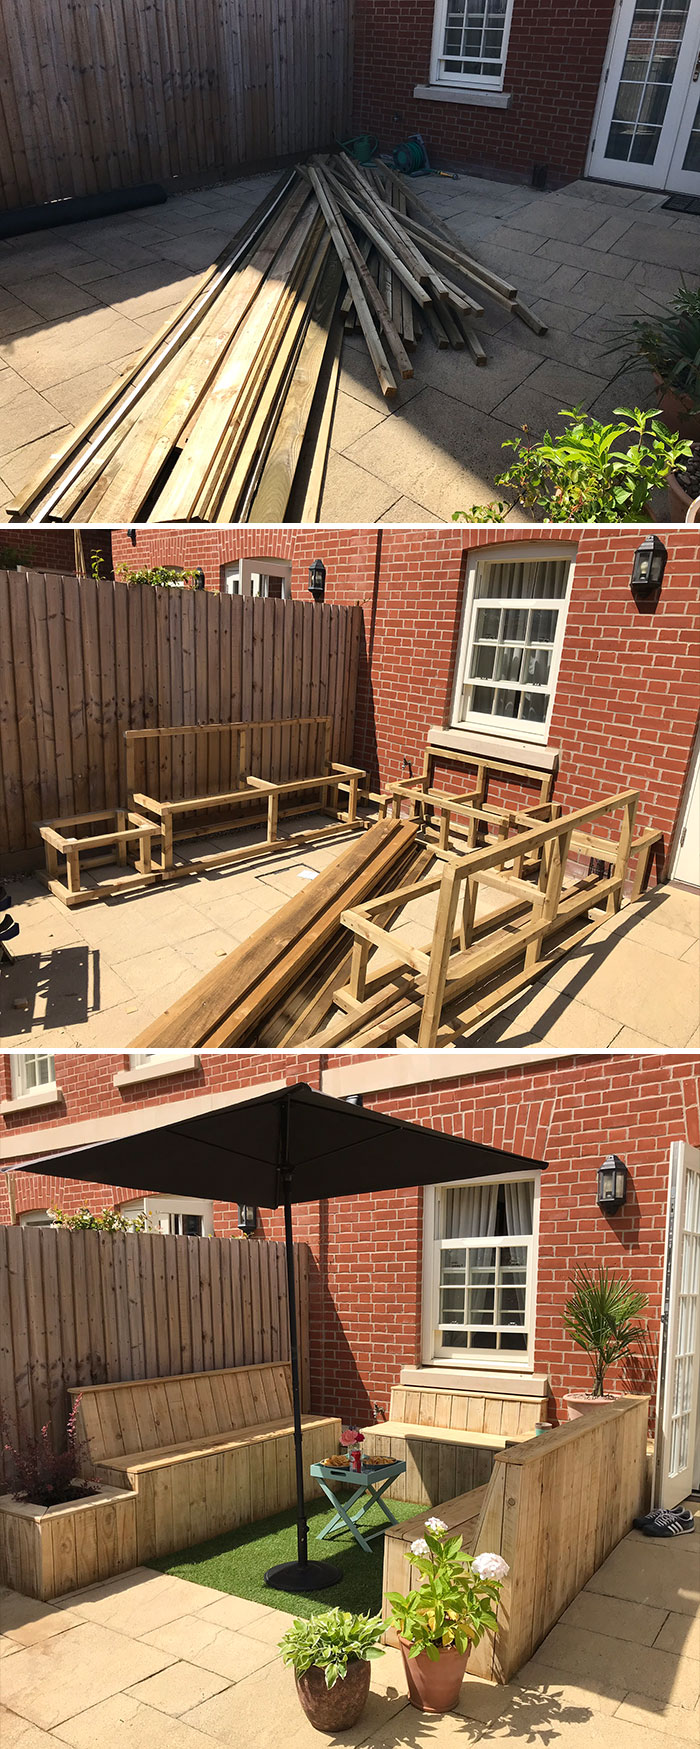 That's Right! It's Another Lockdown Patio Project! I Built A Set Of Benches For Our Small Courtyard Patio